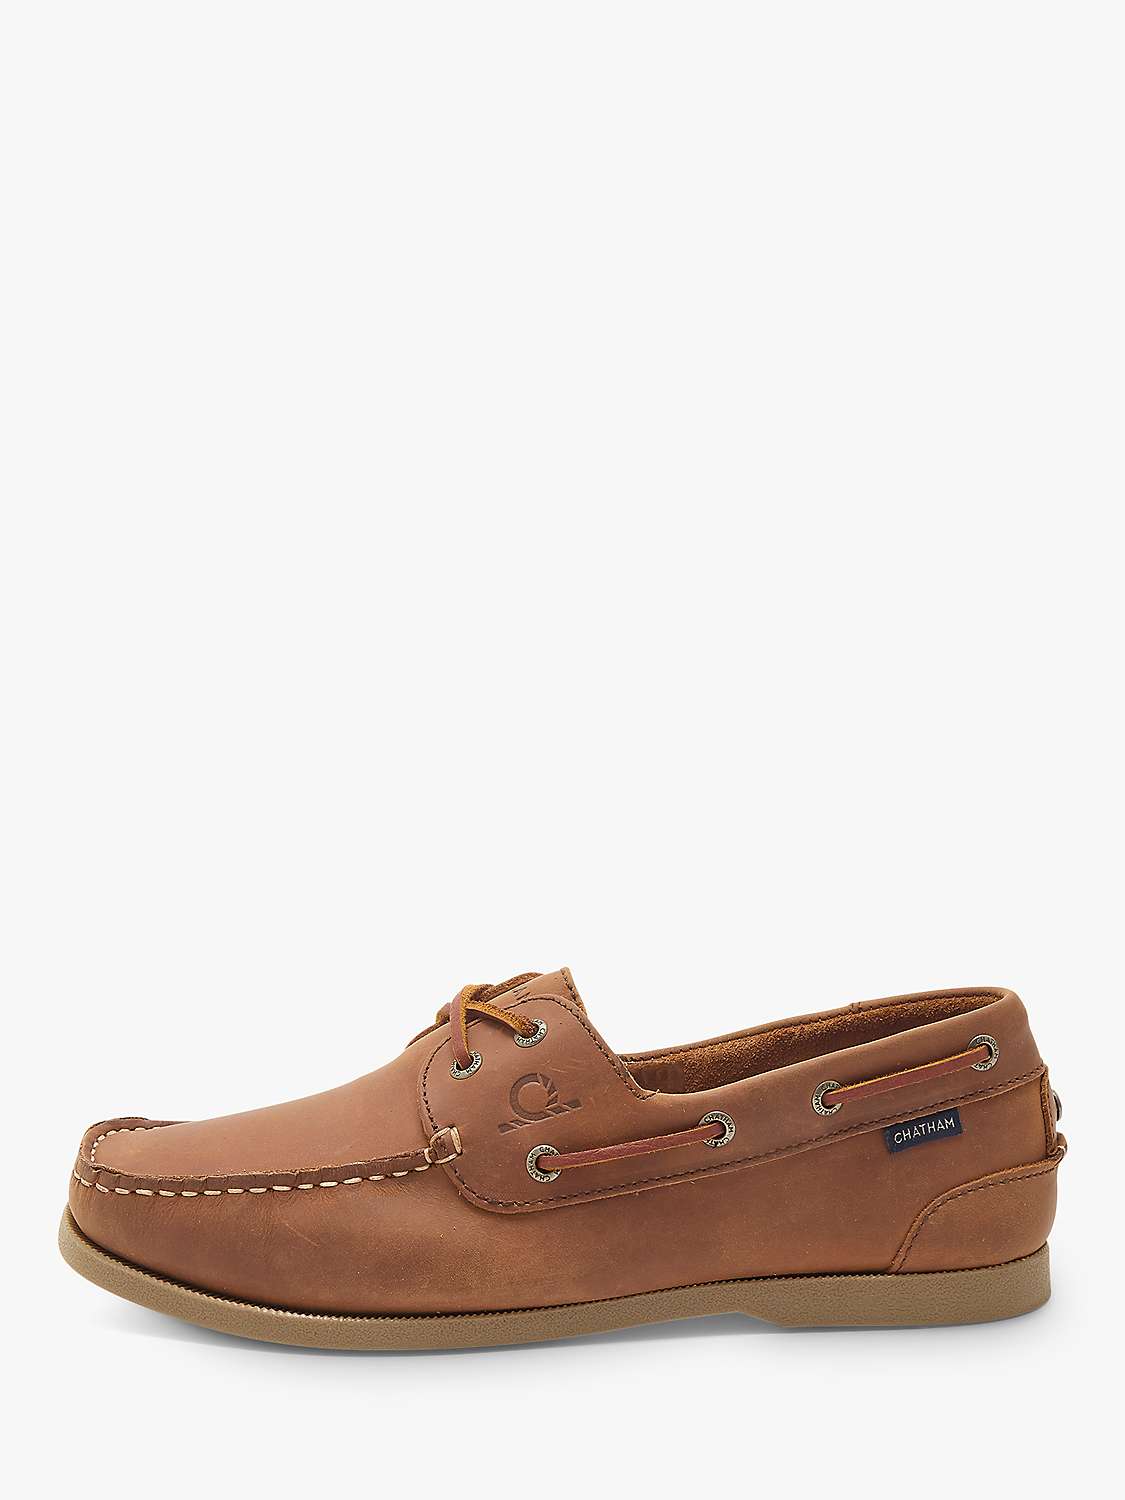 Buy Chatham Galley II Leather Boat Shoes, Dark Tan Online at johnlewis.com